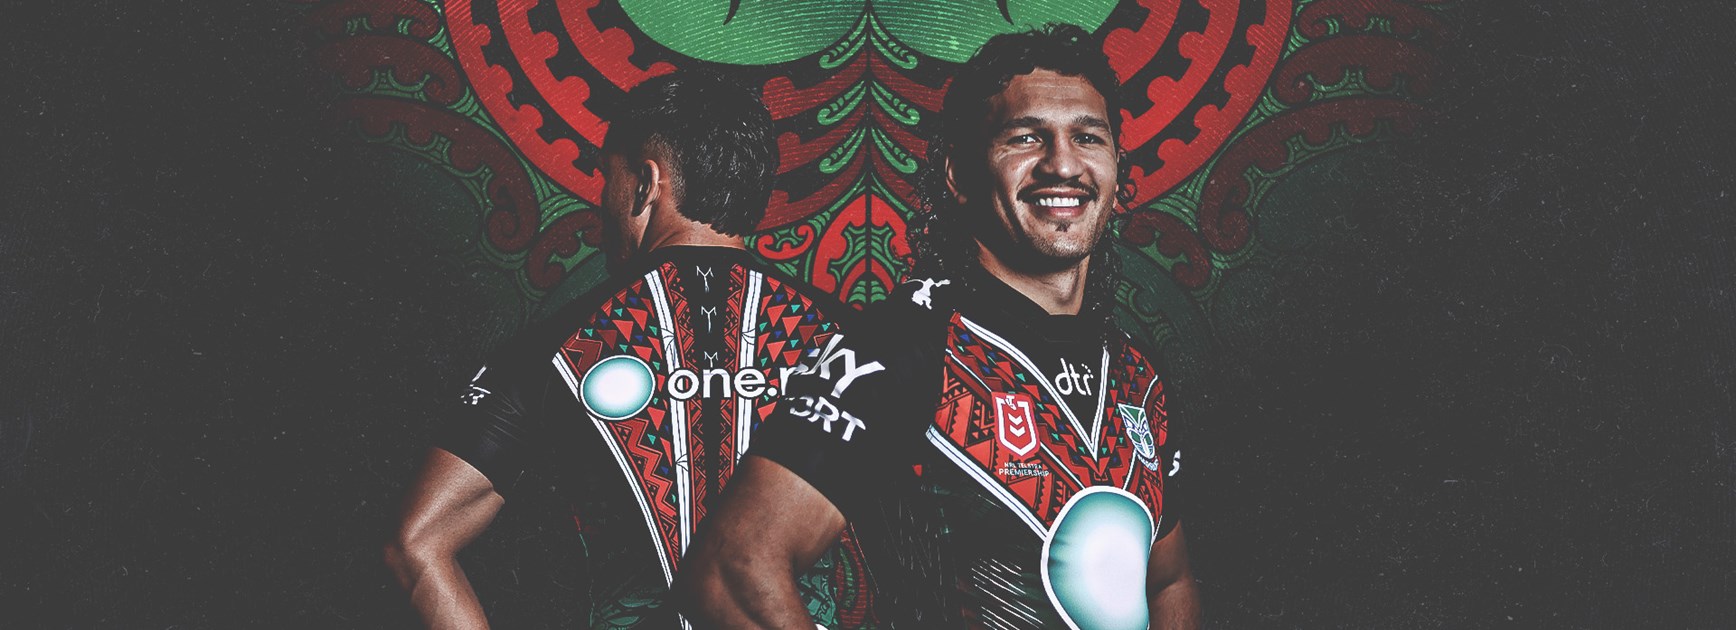 Warriors rugby jersey 2023 2024 Indigenous home Heritage rugby